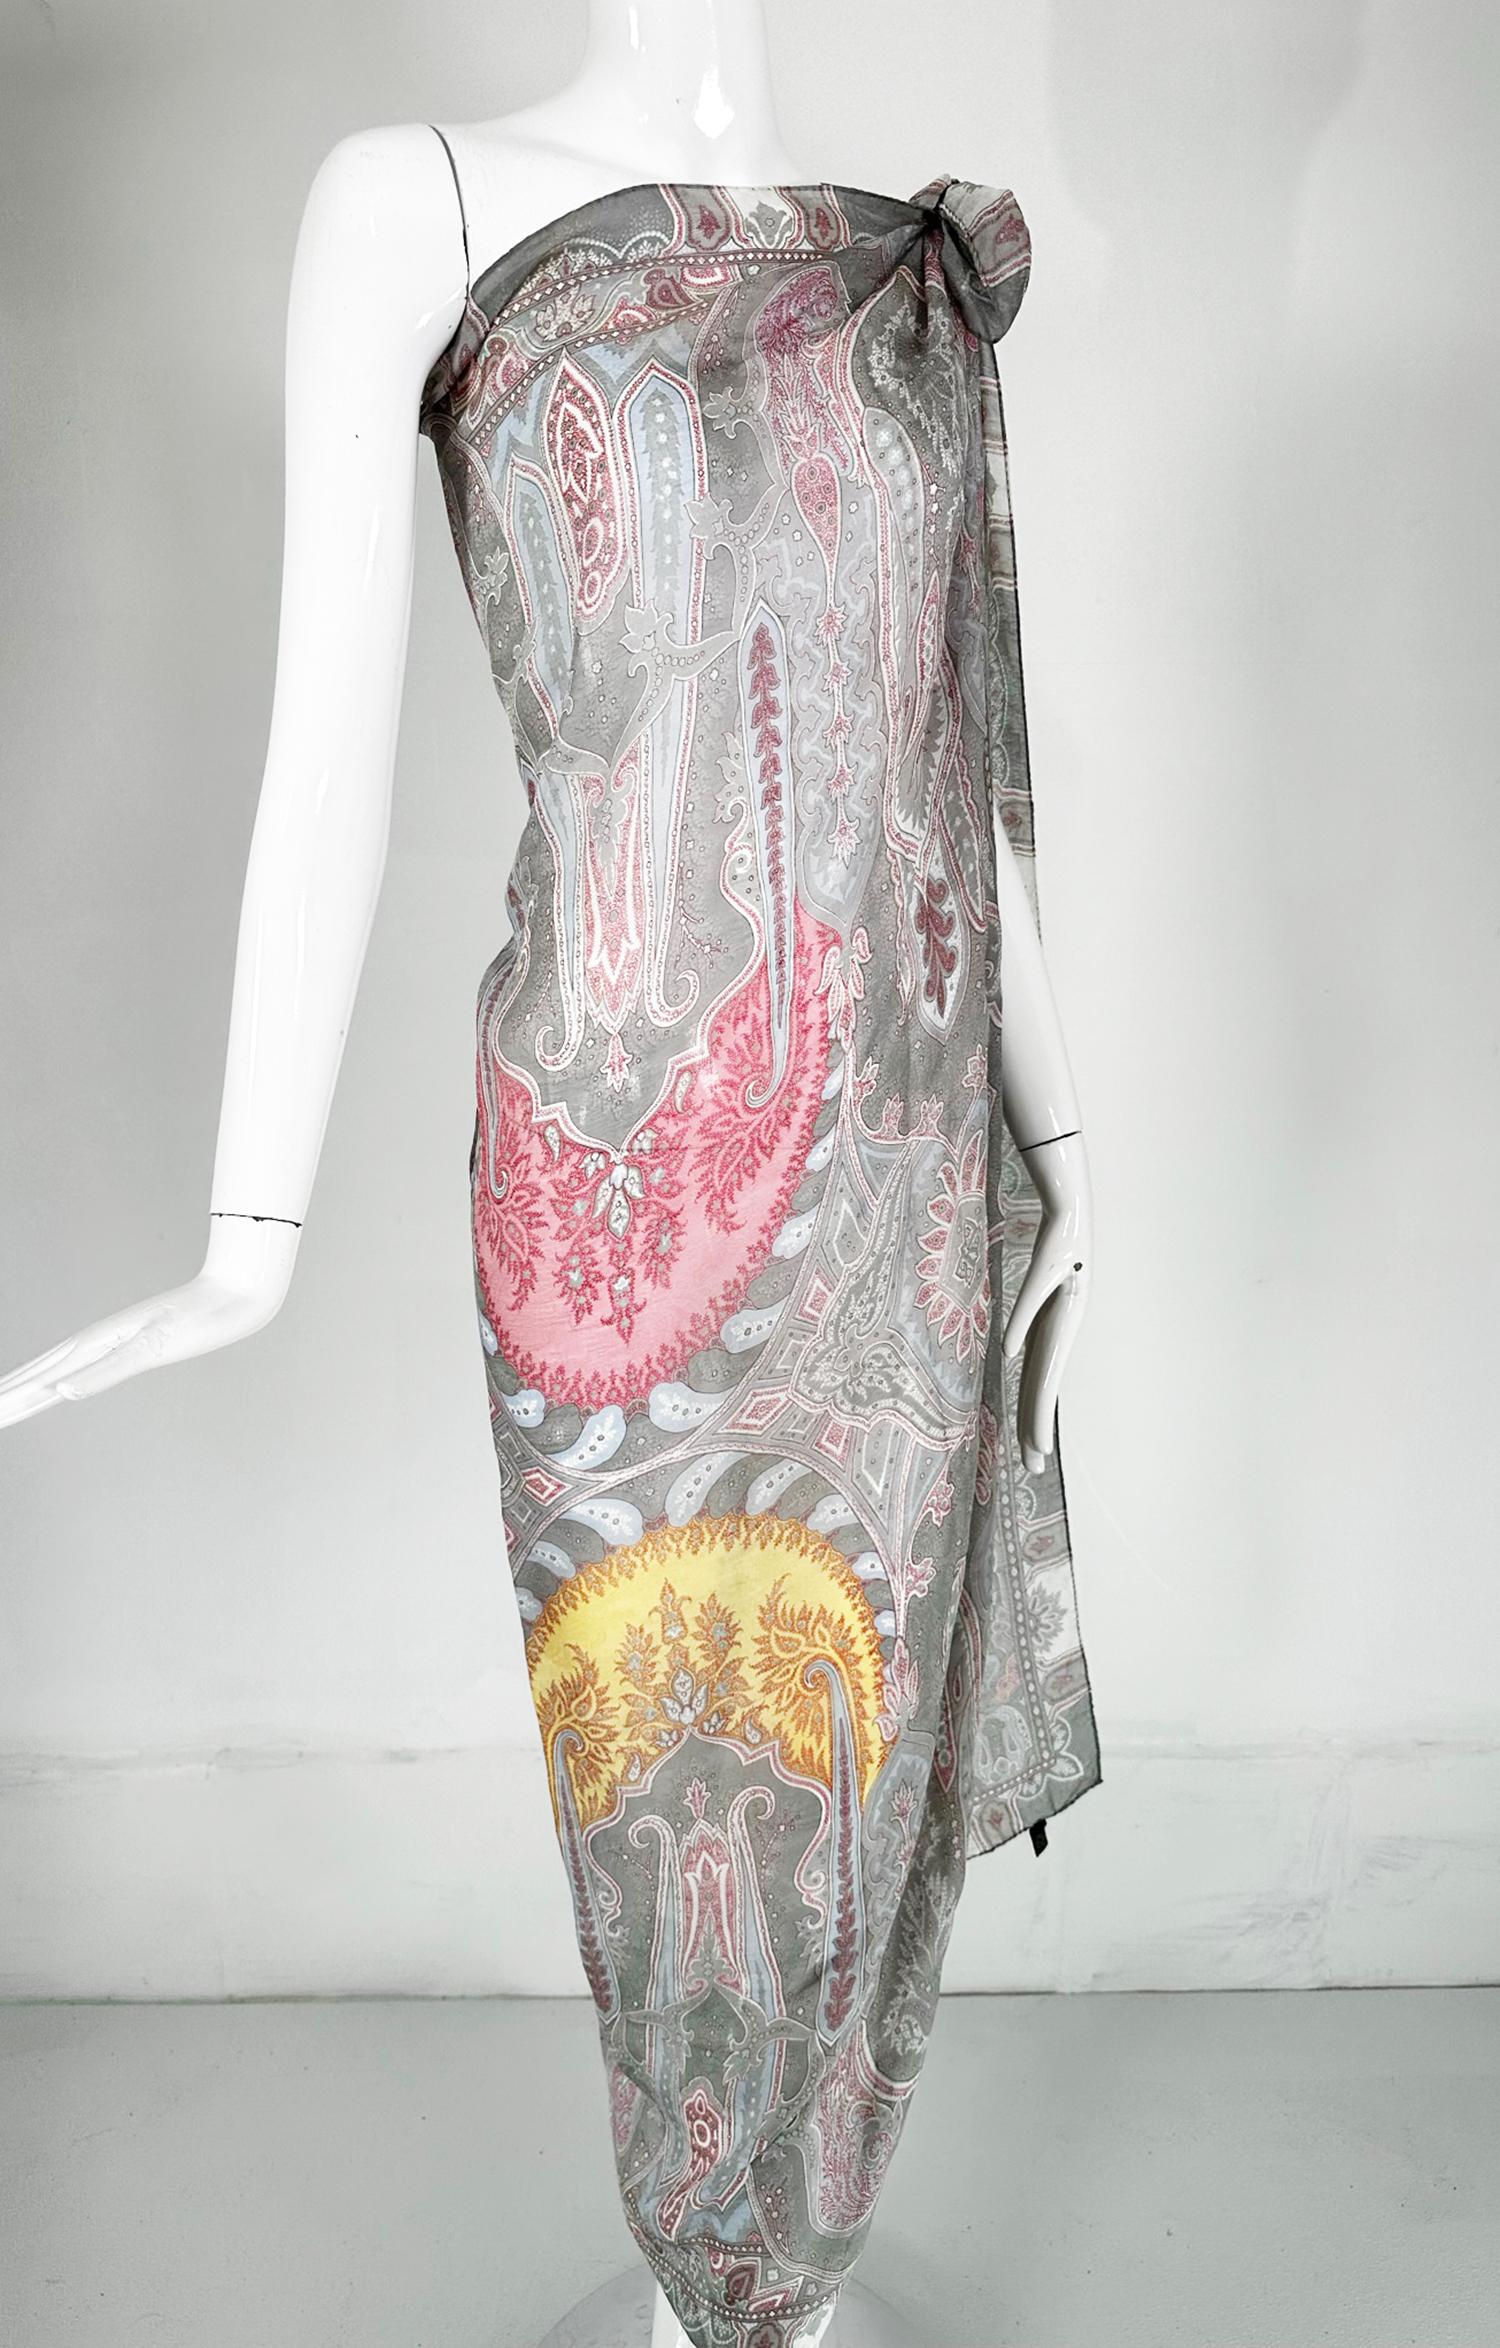 Etro silk chiffon paisley shawl in greys, blues, yellows & pinks, large and perfect for wearing. Intricate paisley design a specialty of Etro in soft shades to wrap yourself up in. This beautiful scarf is sheer silk with a rolled edge, it's in